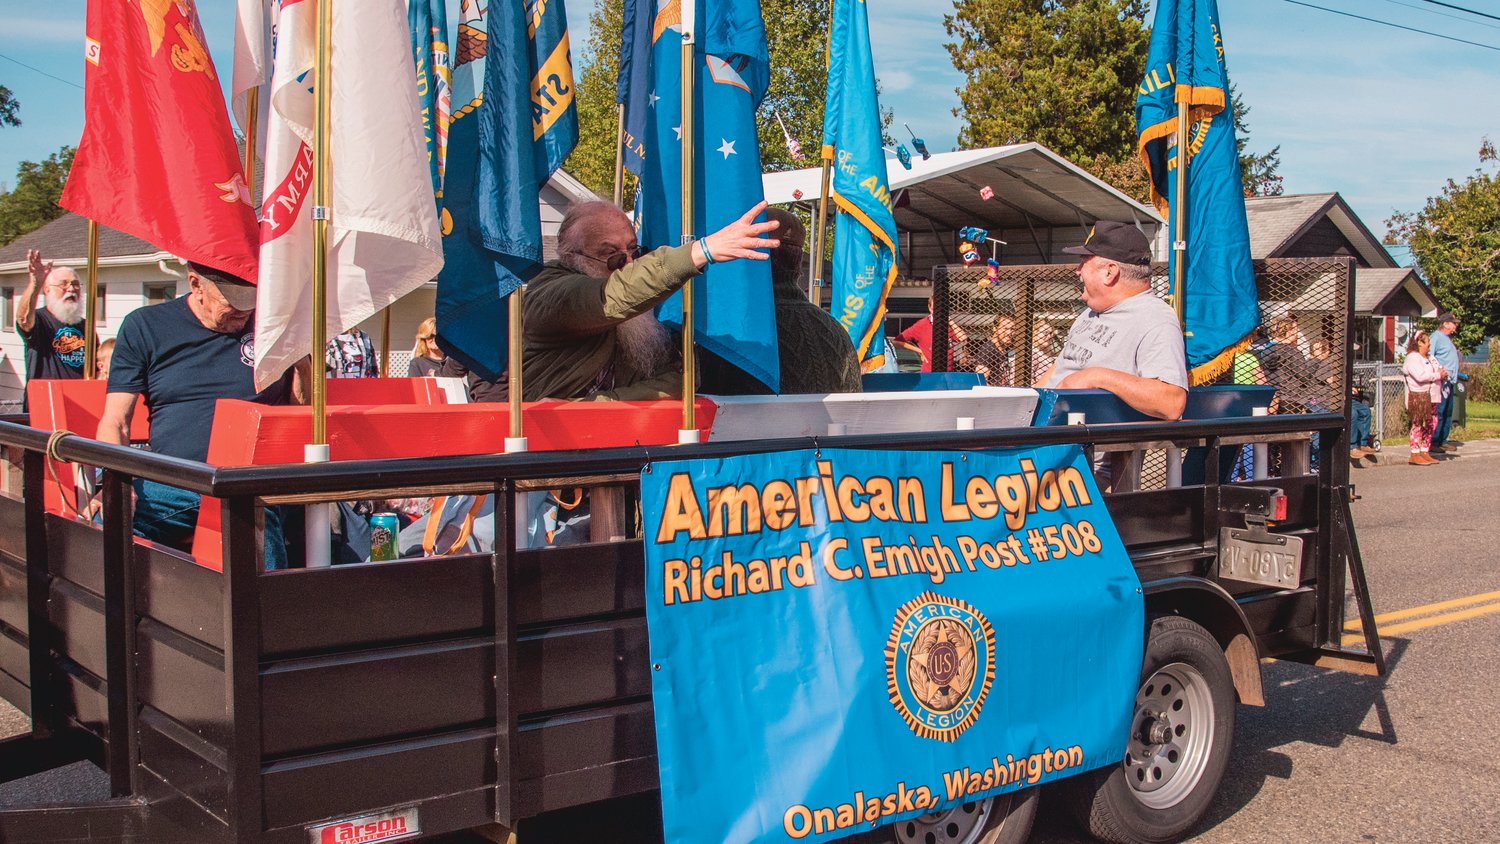 Candy is thrown from the American Legion Richard C. Emigh Post #508 float during the Onalaska Apple Harvest parade Saturday morning.